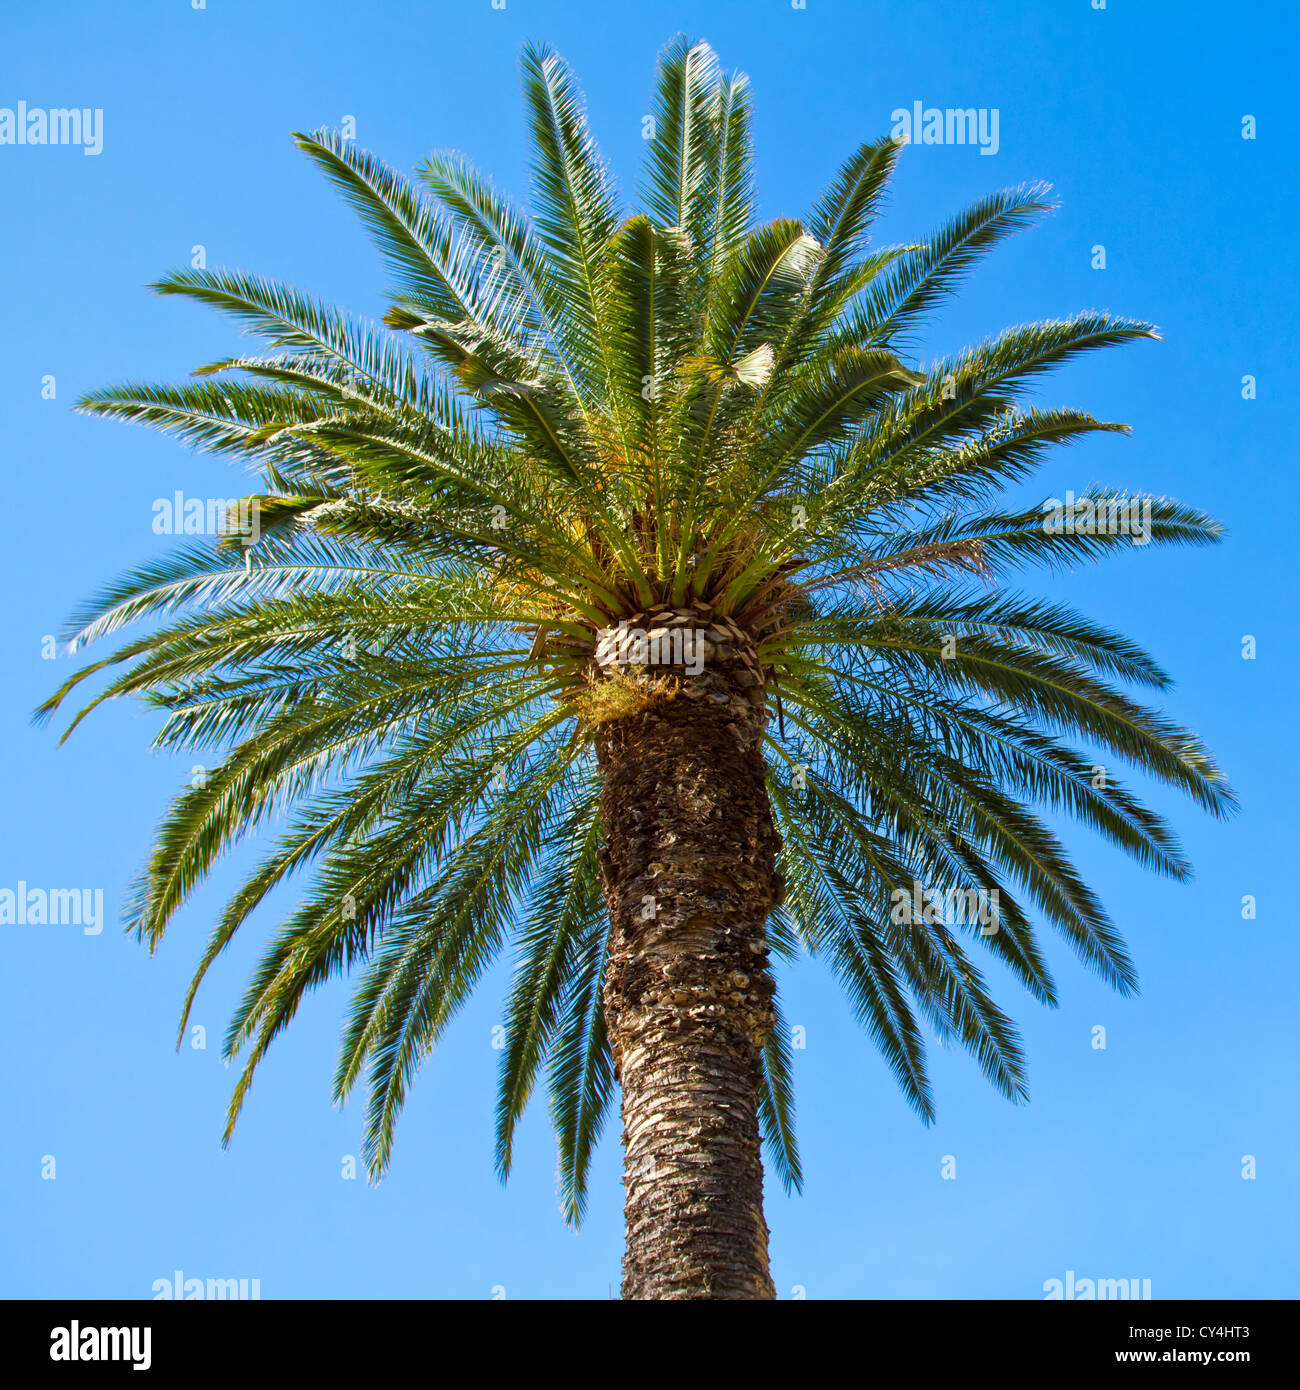 Green palm tree against blue sky background Banque D'Images